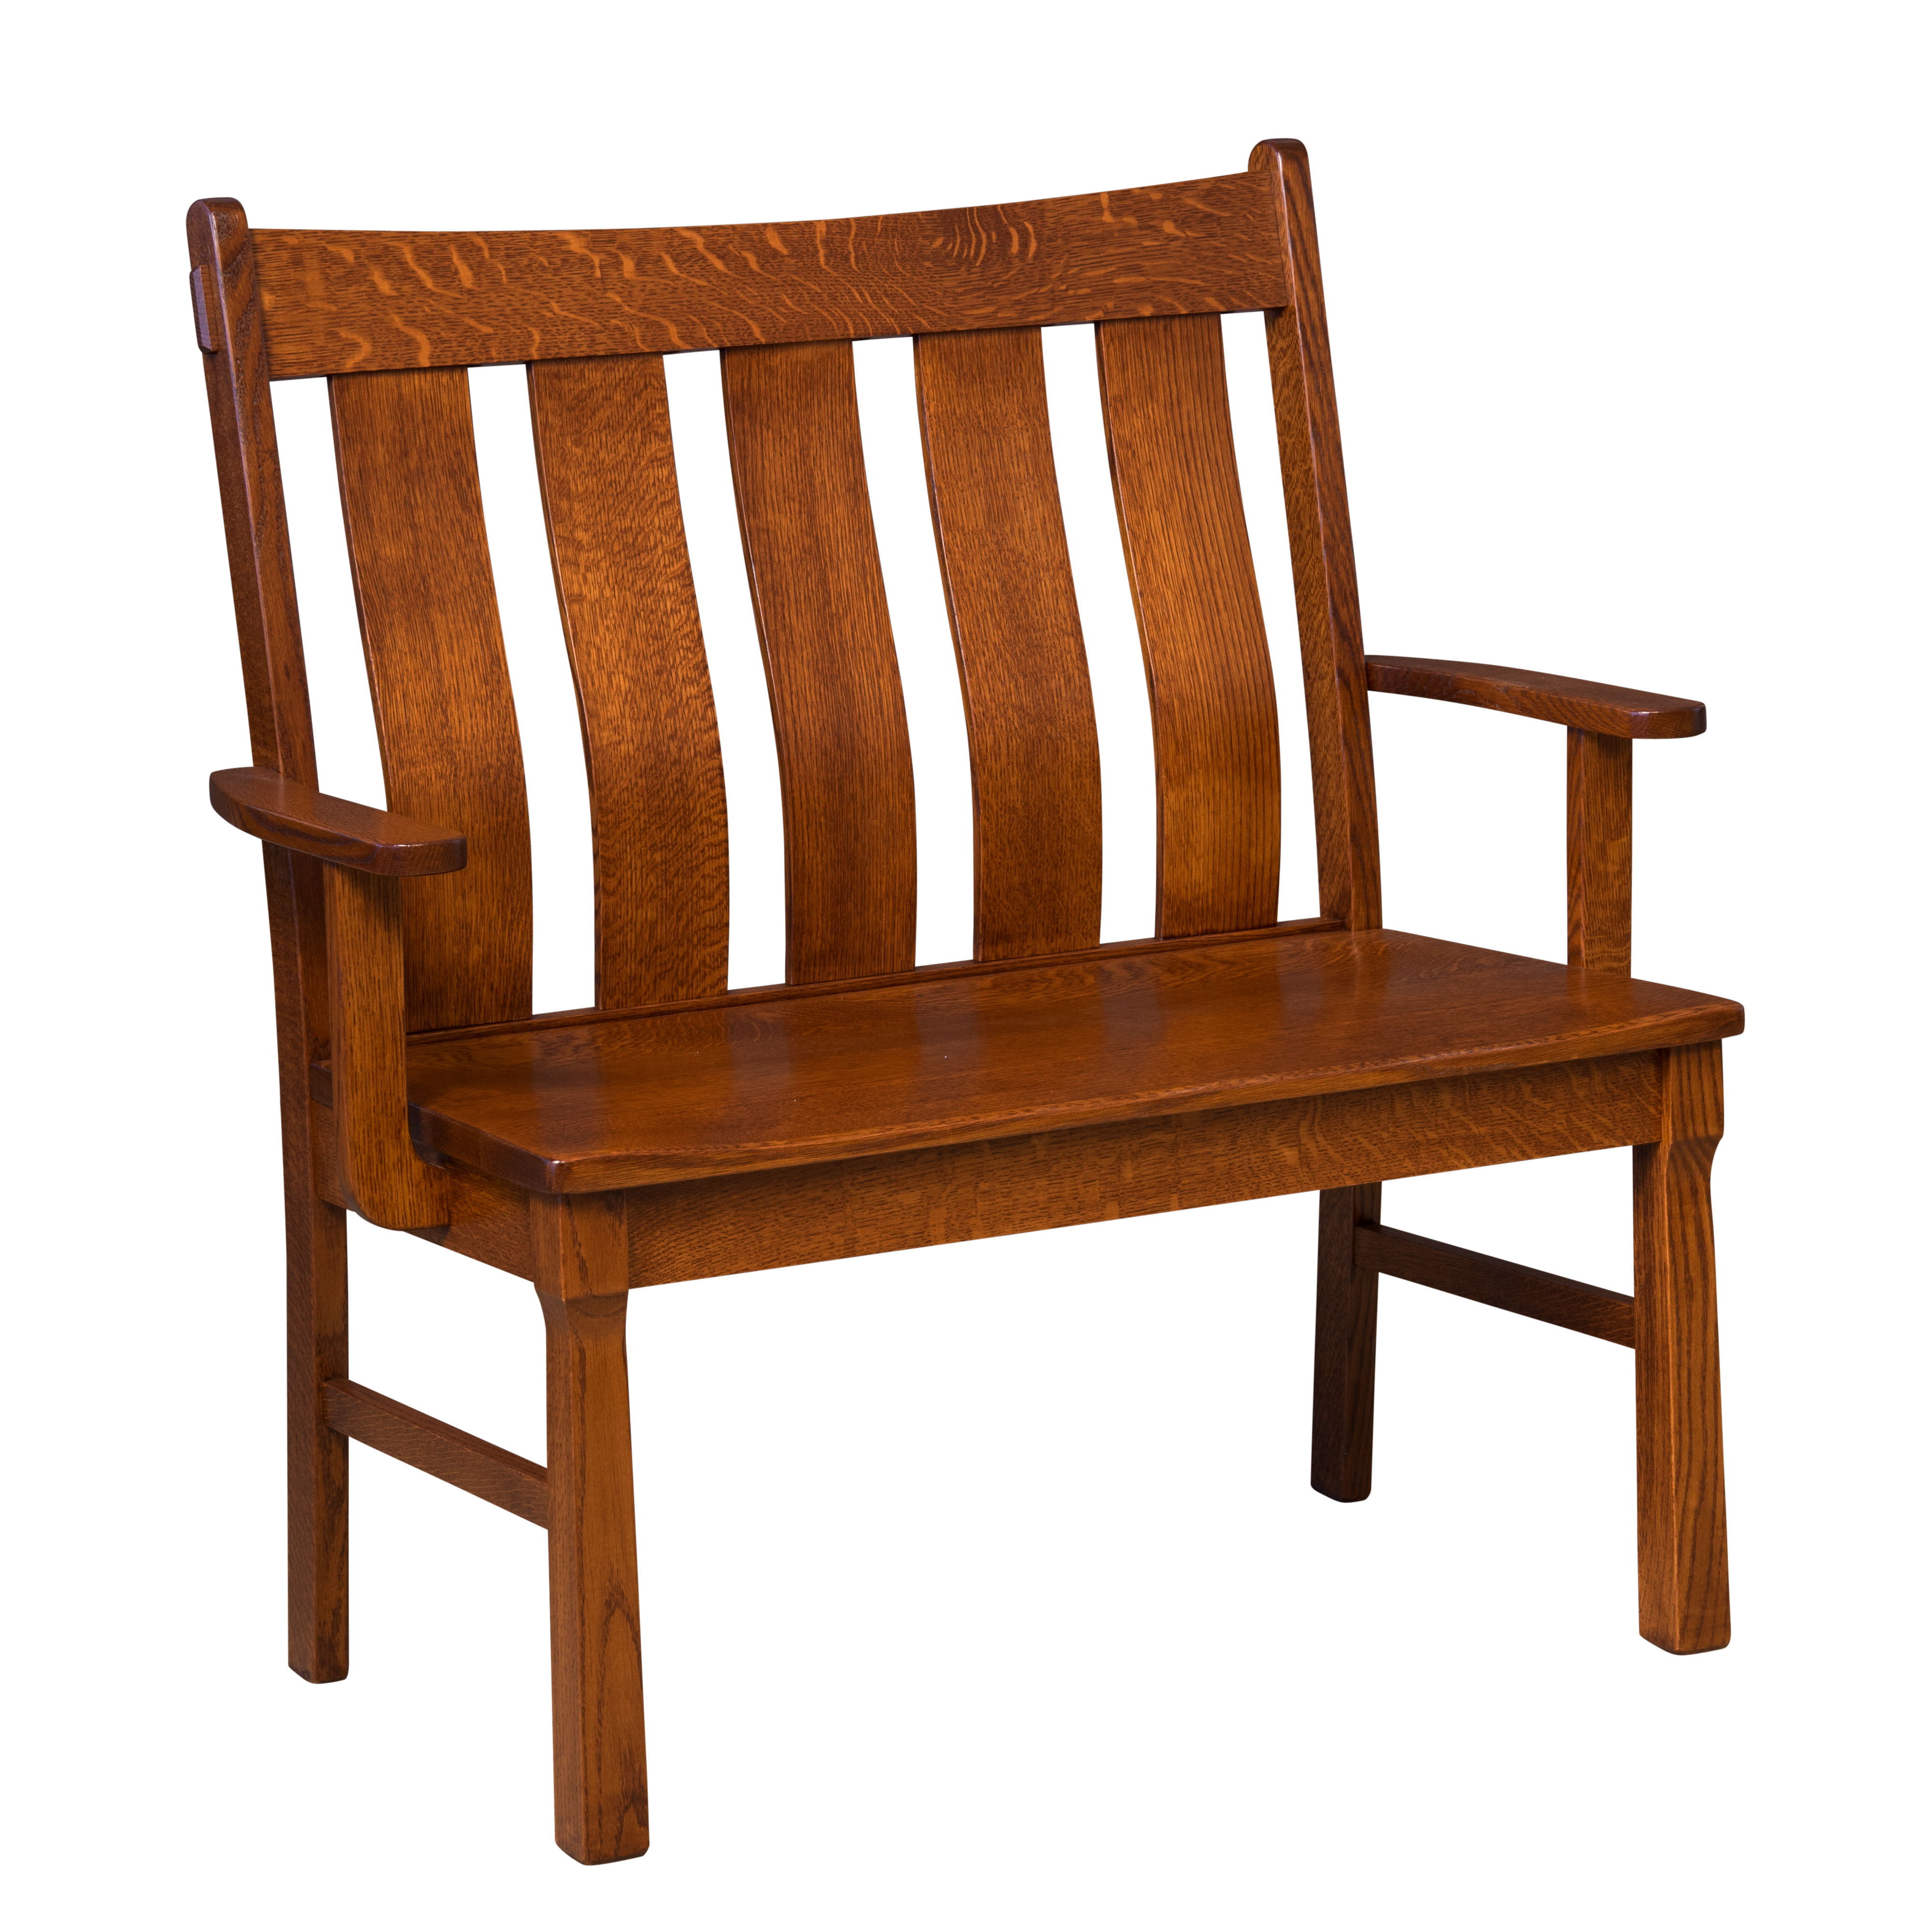 Beaumont Dining Chair – Wheatstate Wood Design